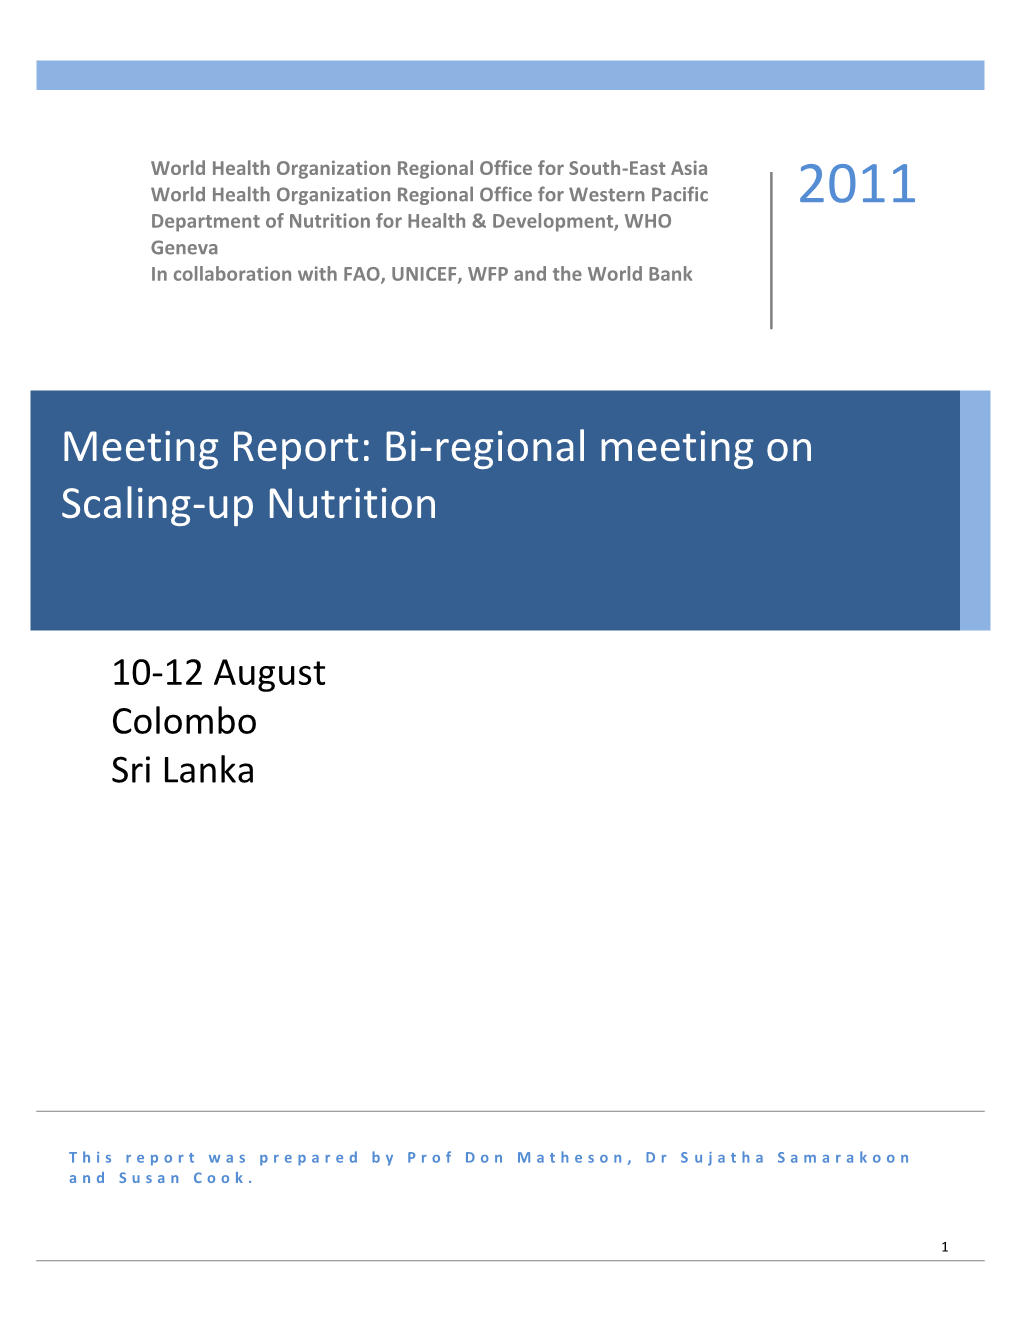 Bi-Regional Meeting on Scaling-Up Nutrition Colombo, Sri Lanka, 10-12 August 2011 [In Collaboration with FAO, UNICEF, WFP and the World Bank] [Rev.1]